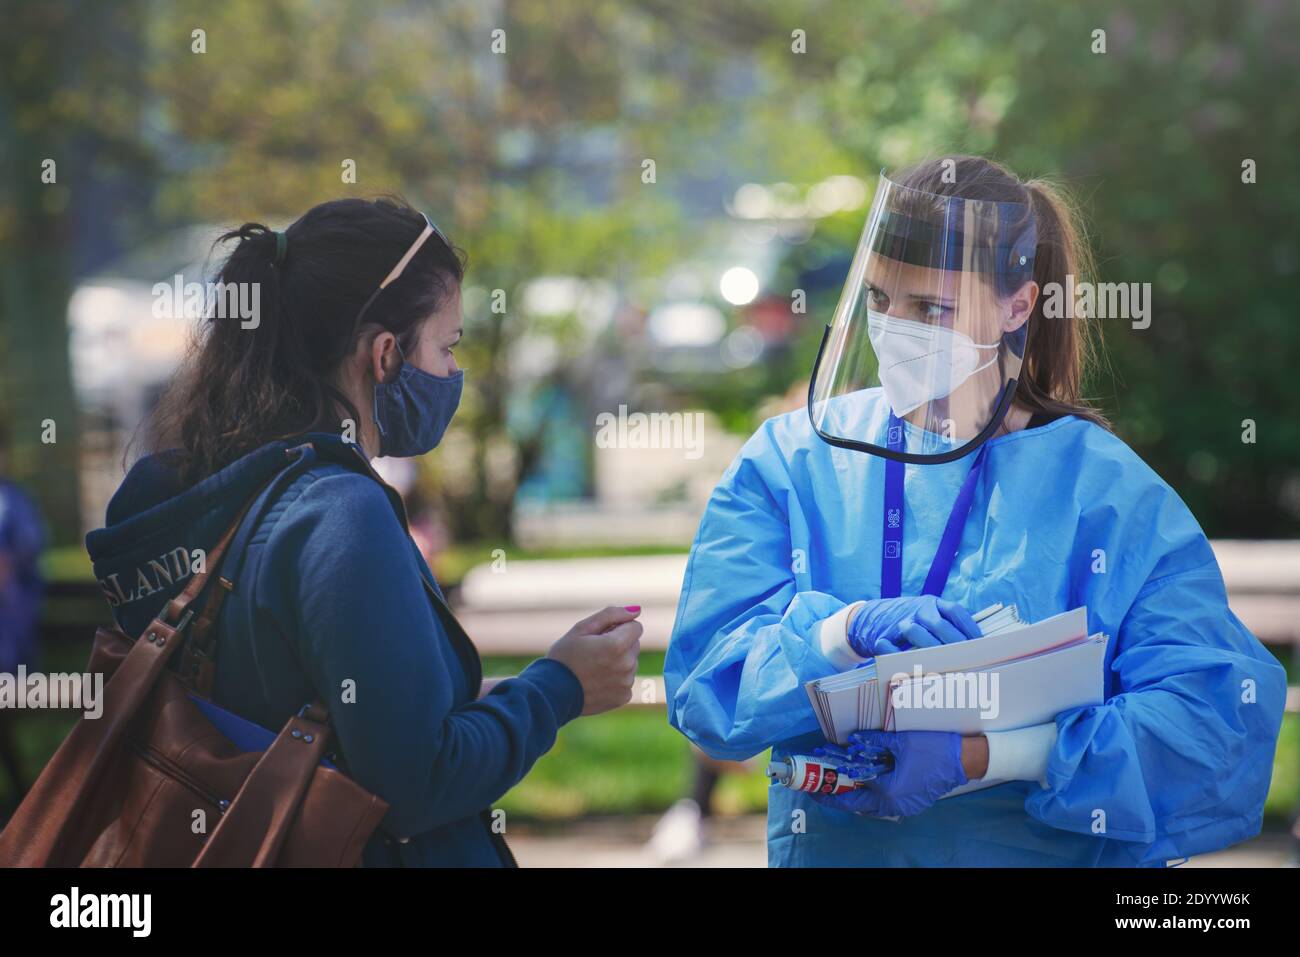 Medic with respirator and plastic face shield giving a questionnaire to a woman with cloth face mask before undergoing a corona virus test. Stock Photo